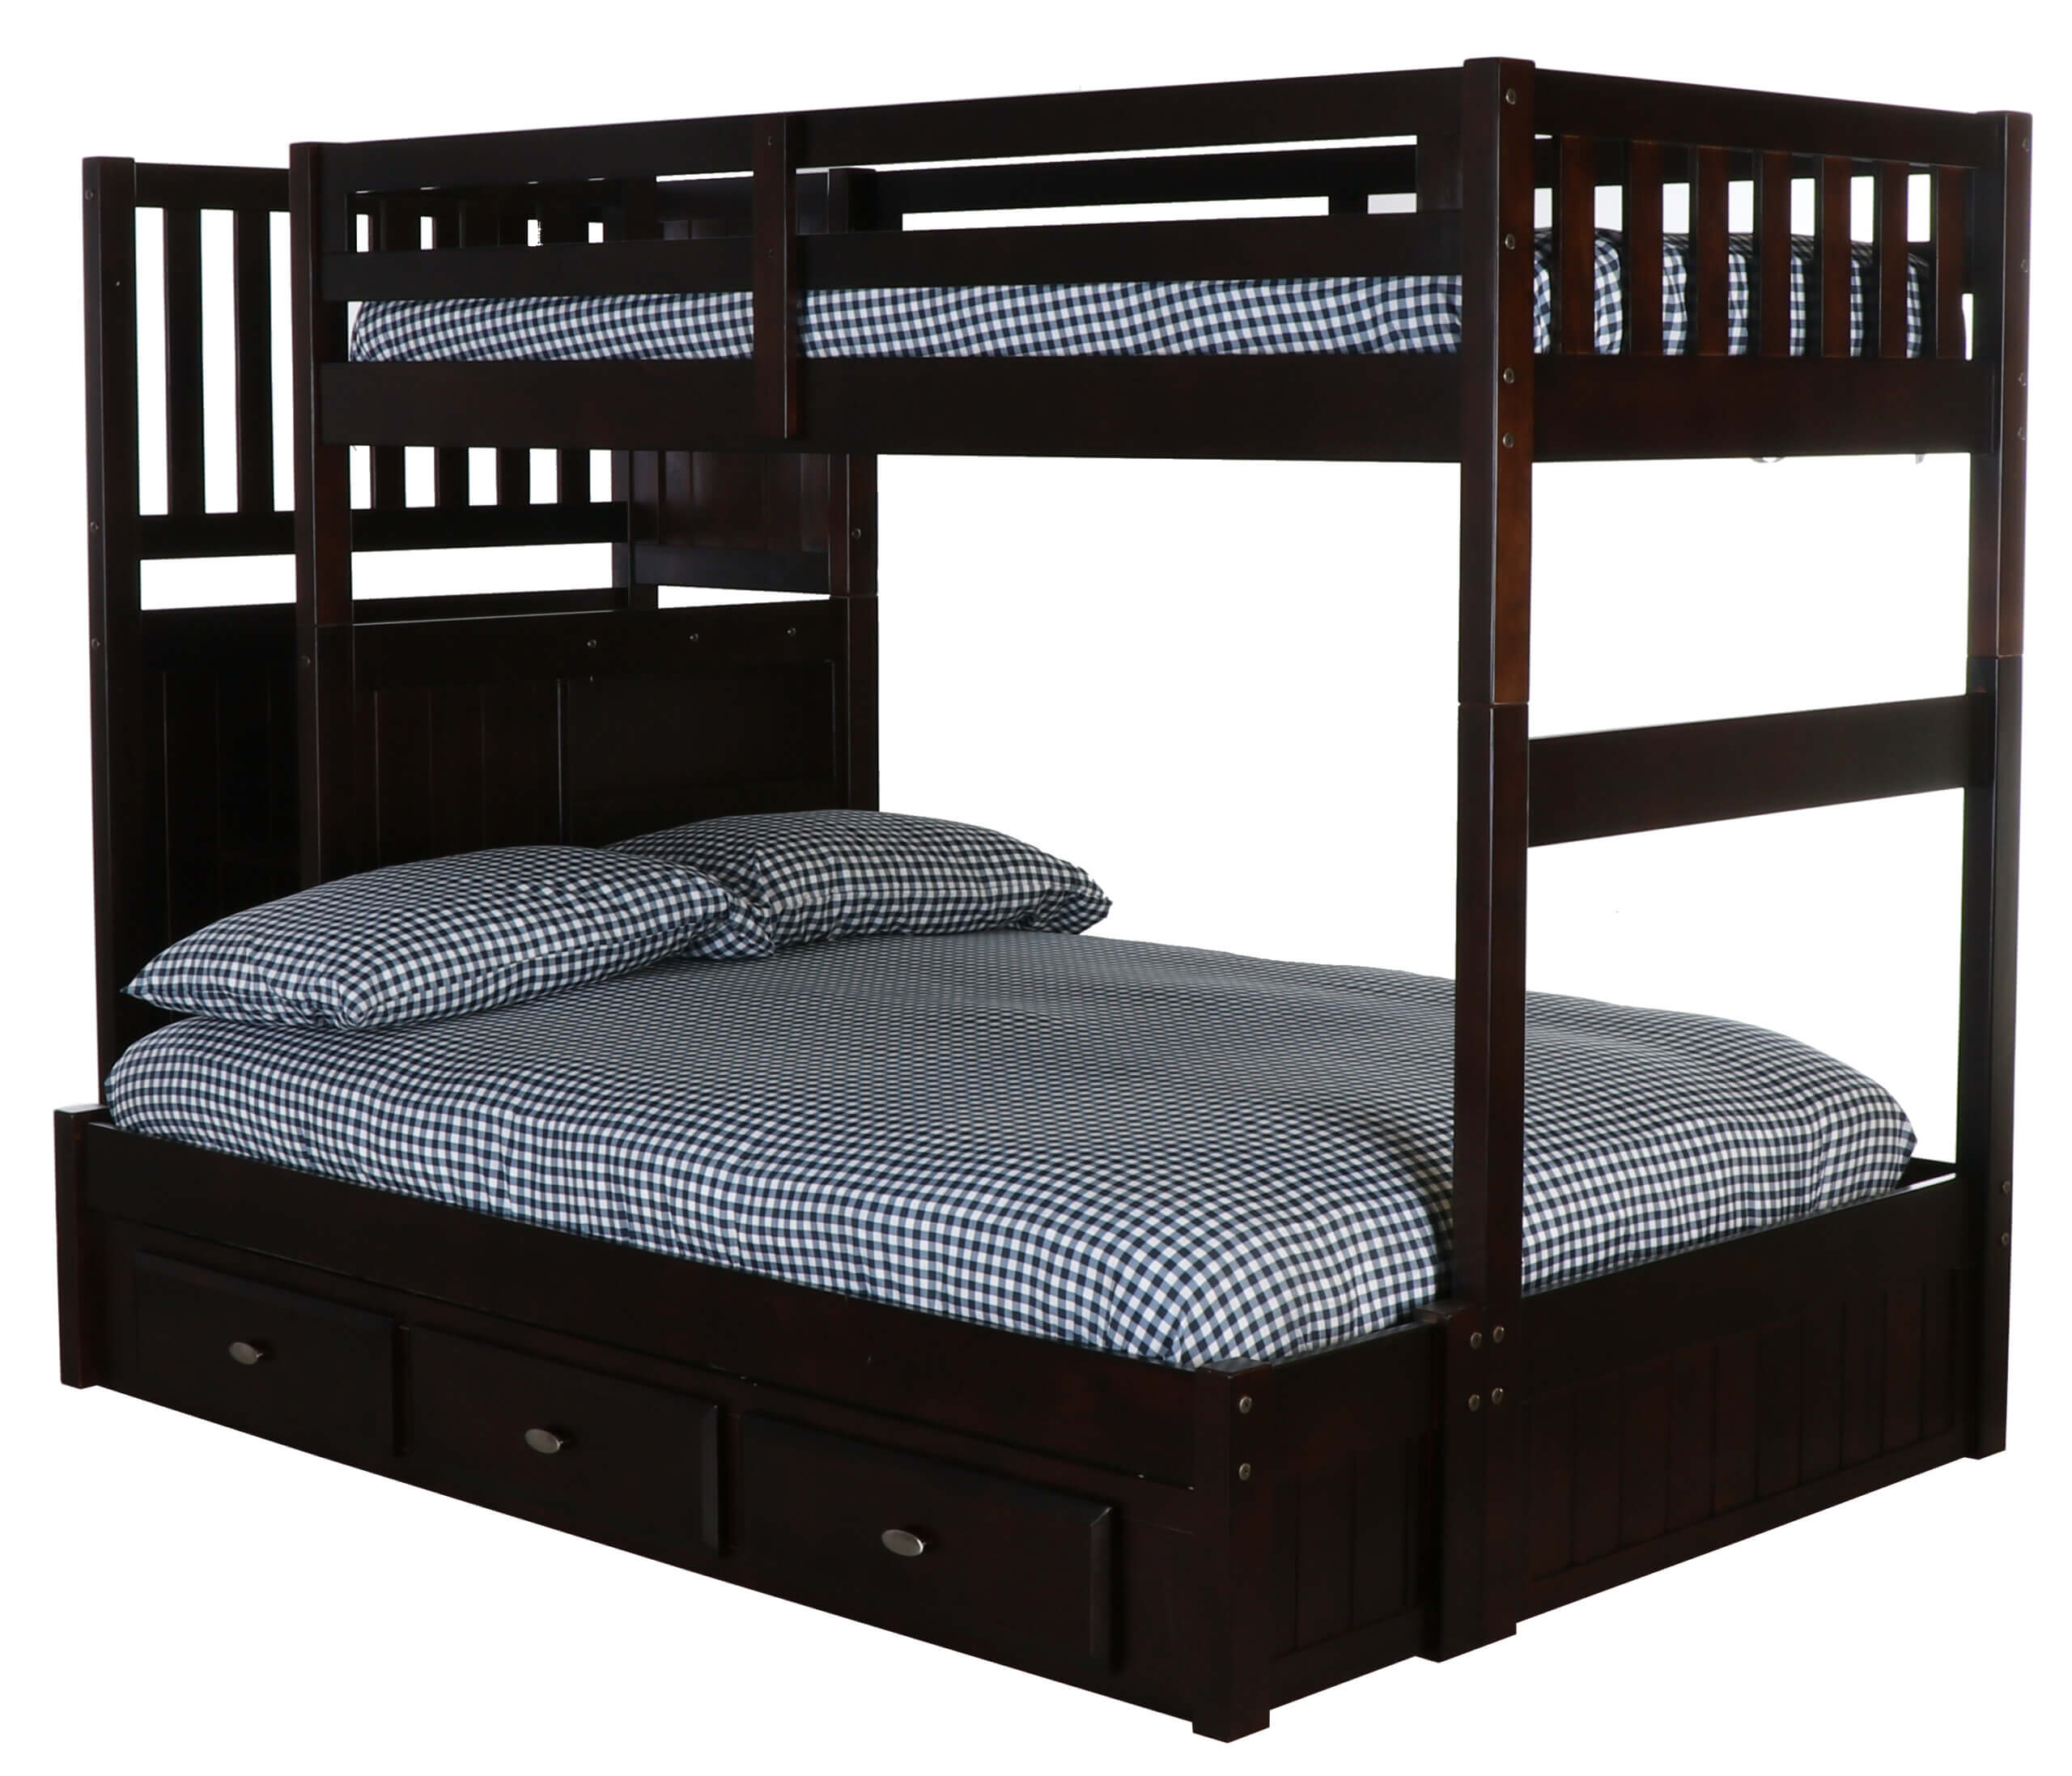 Espresso Staircase Bunk Bed All, American Furniture Warehouse Twin Beds